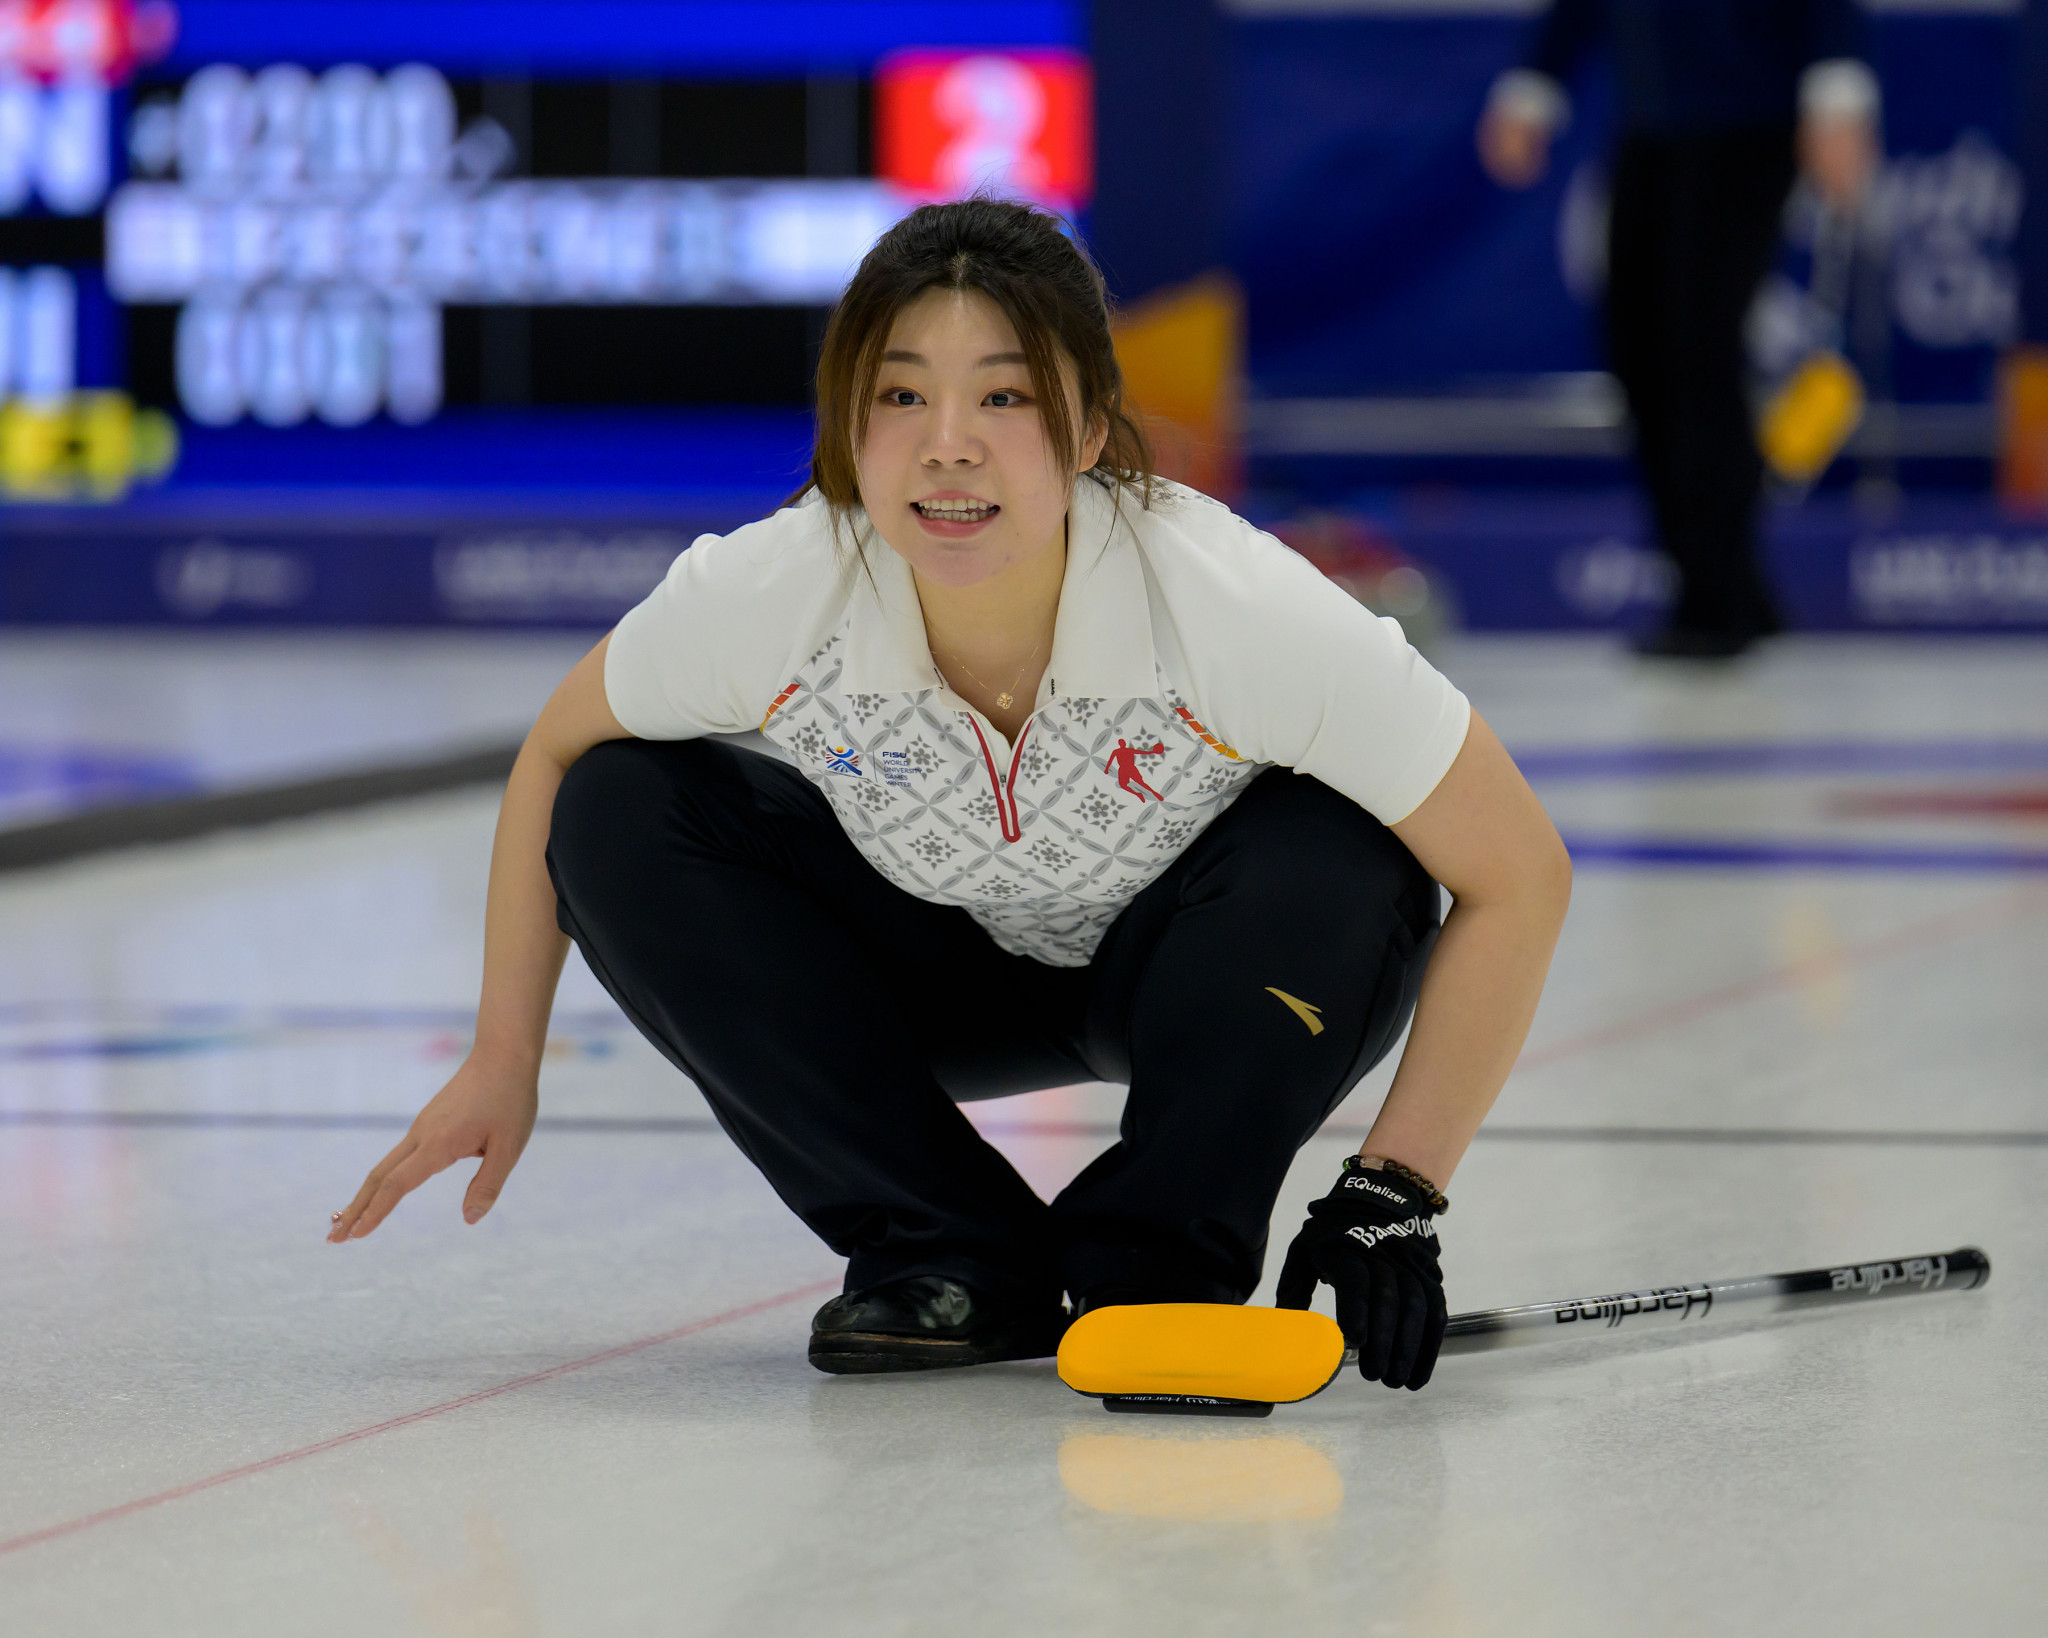 China beat the United States in the women's curling competition to confirm their place in the final against South Korea ©FISU